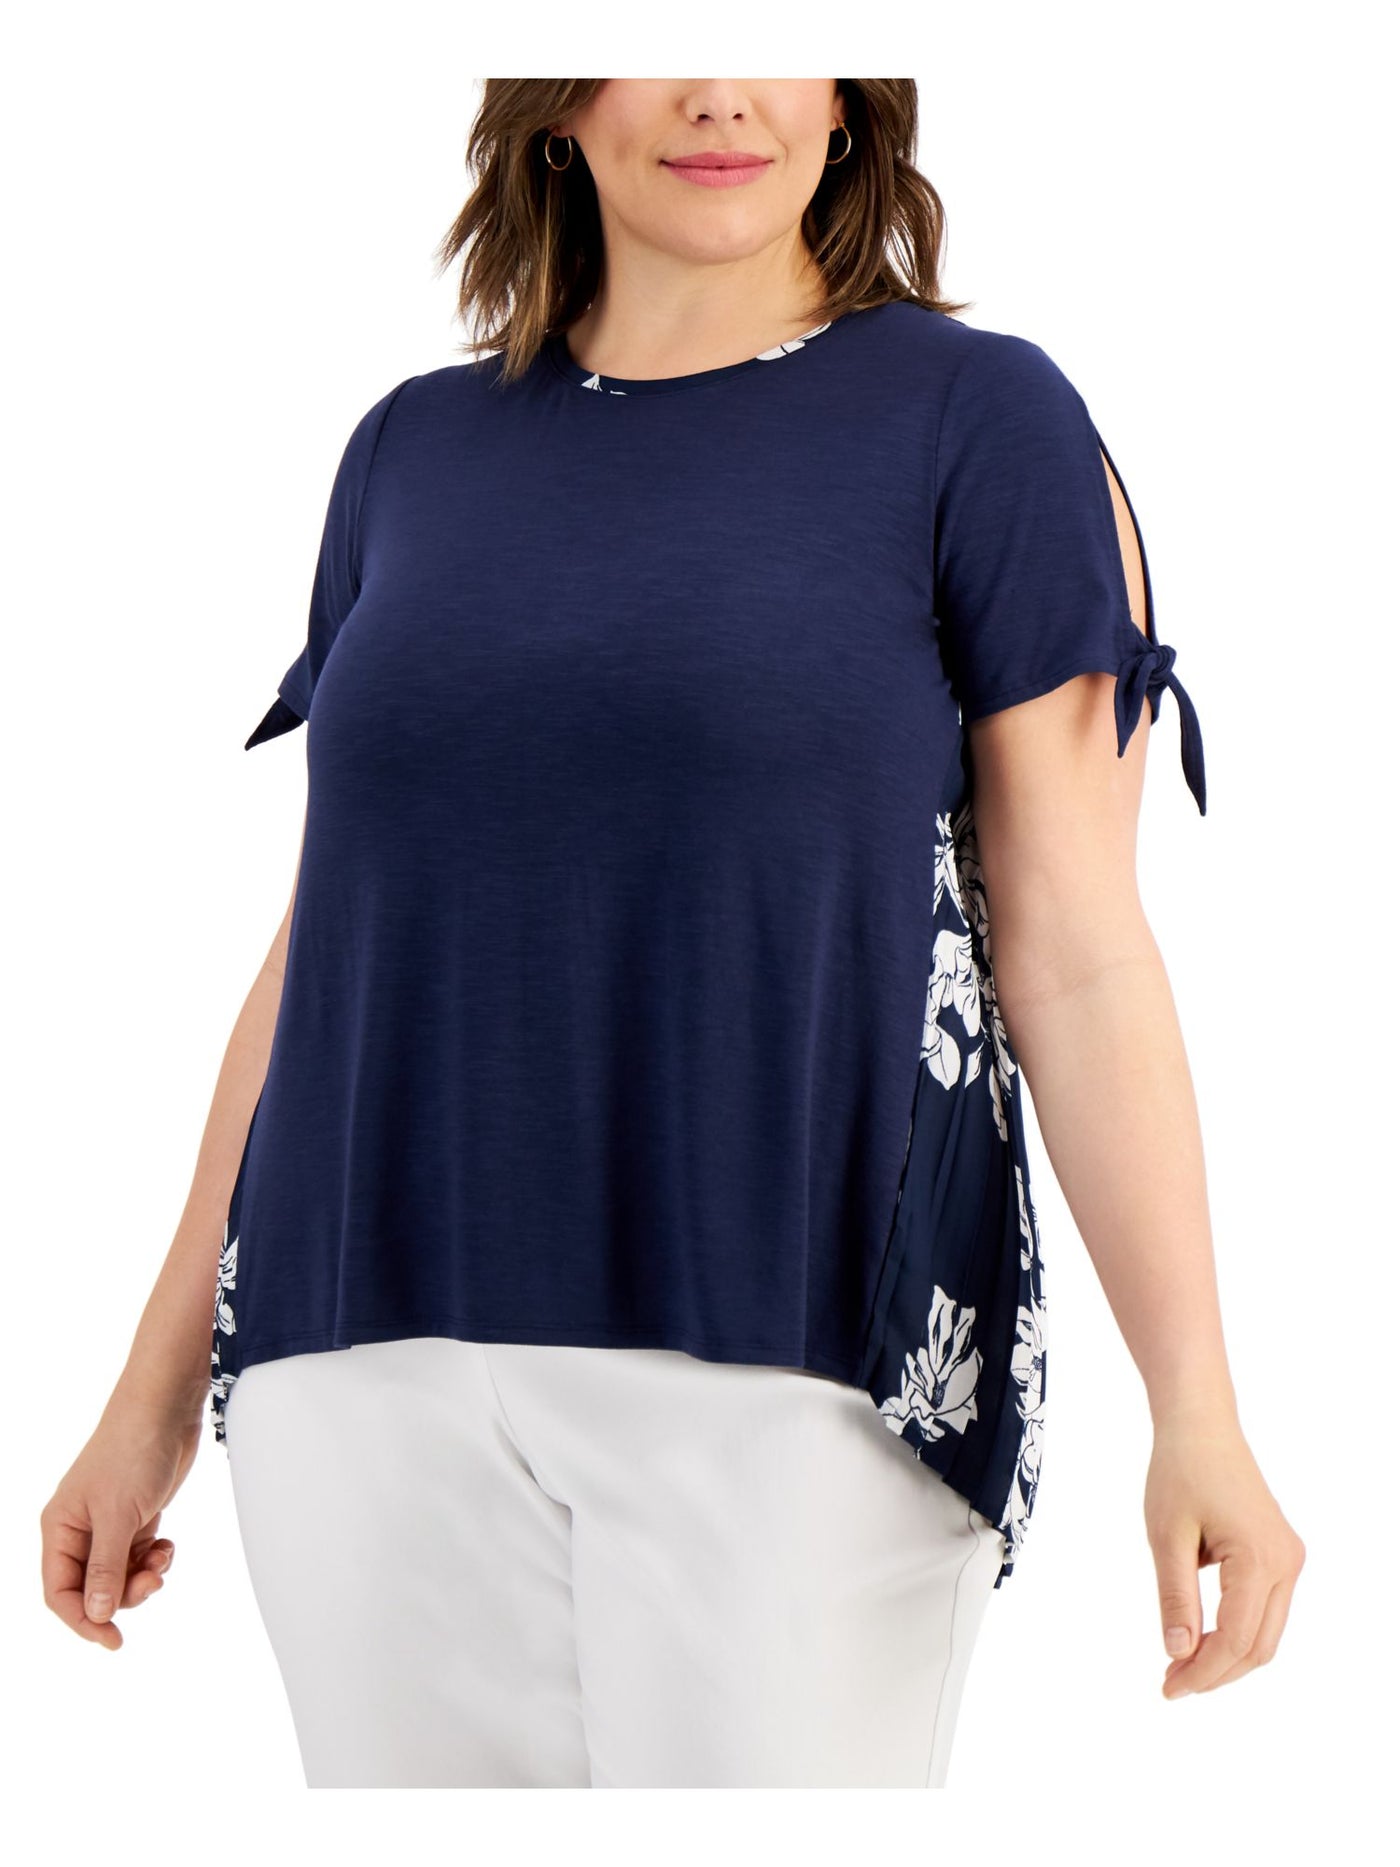 JM COLLECTION Womens Navy Printed Crew Neck Top Plus 0X